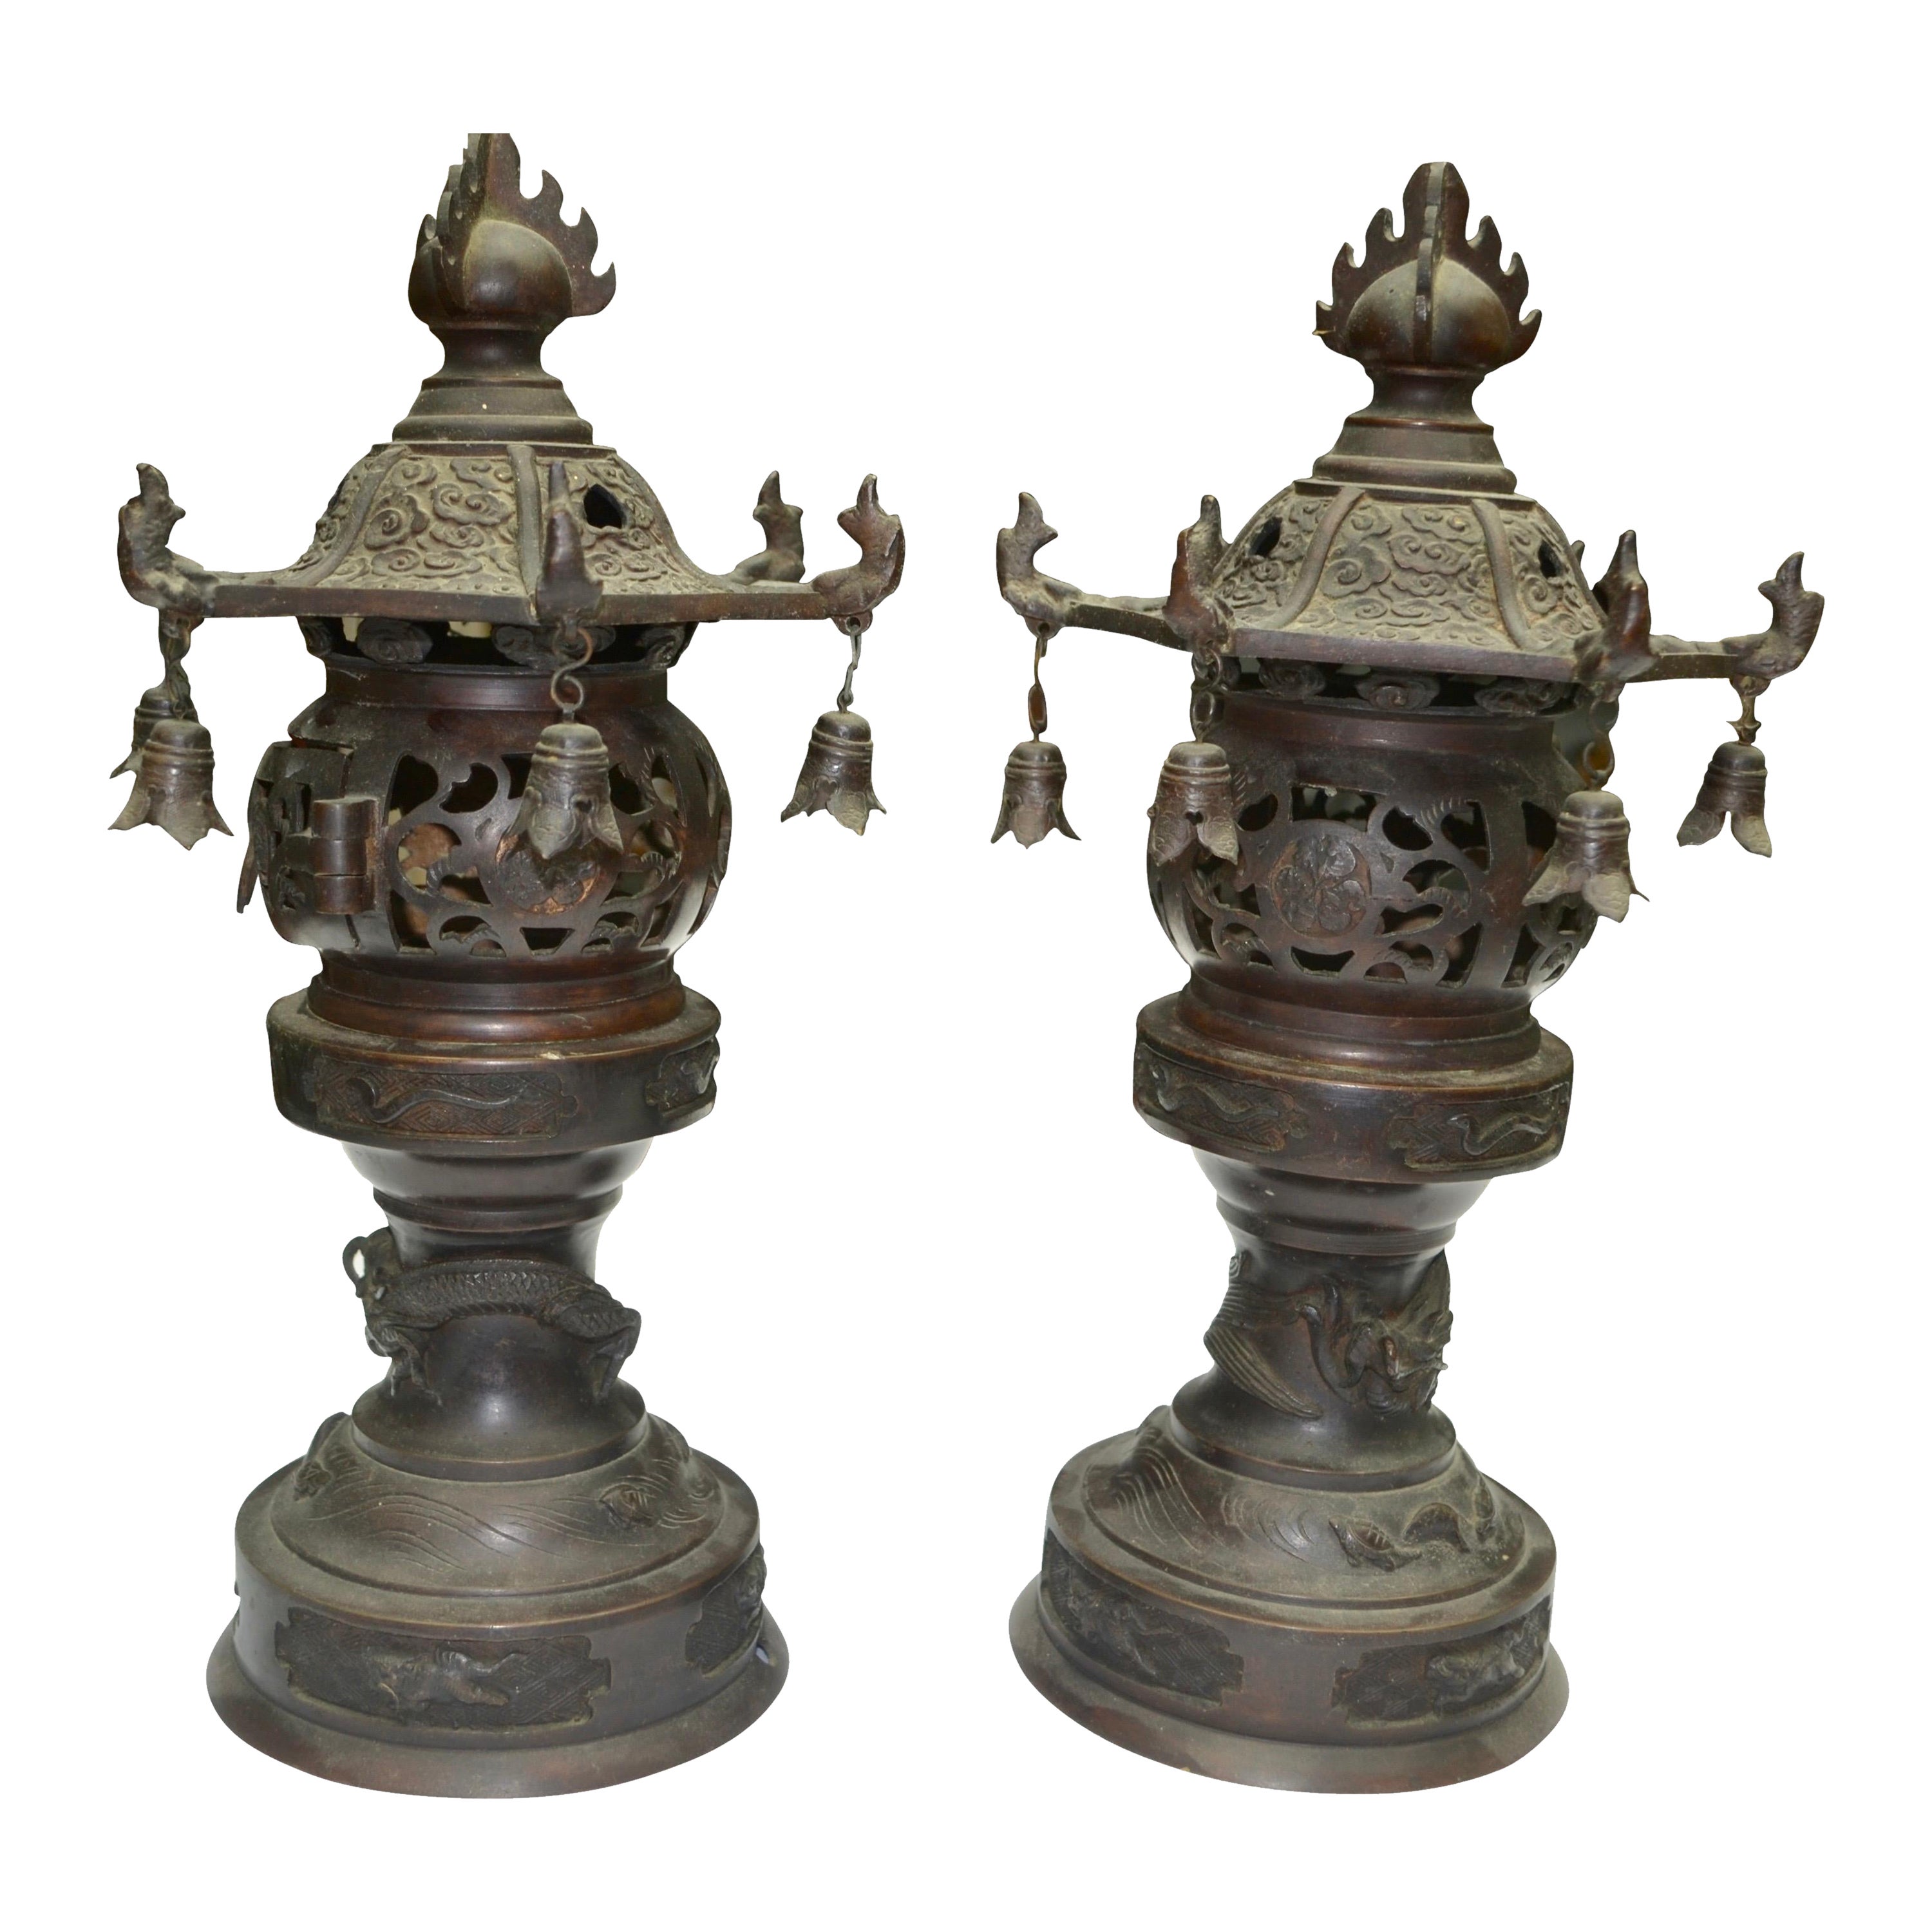 Pair of Qing Dynasty Patinated Bronze Censors/Perfume Burners